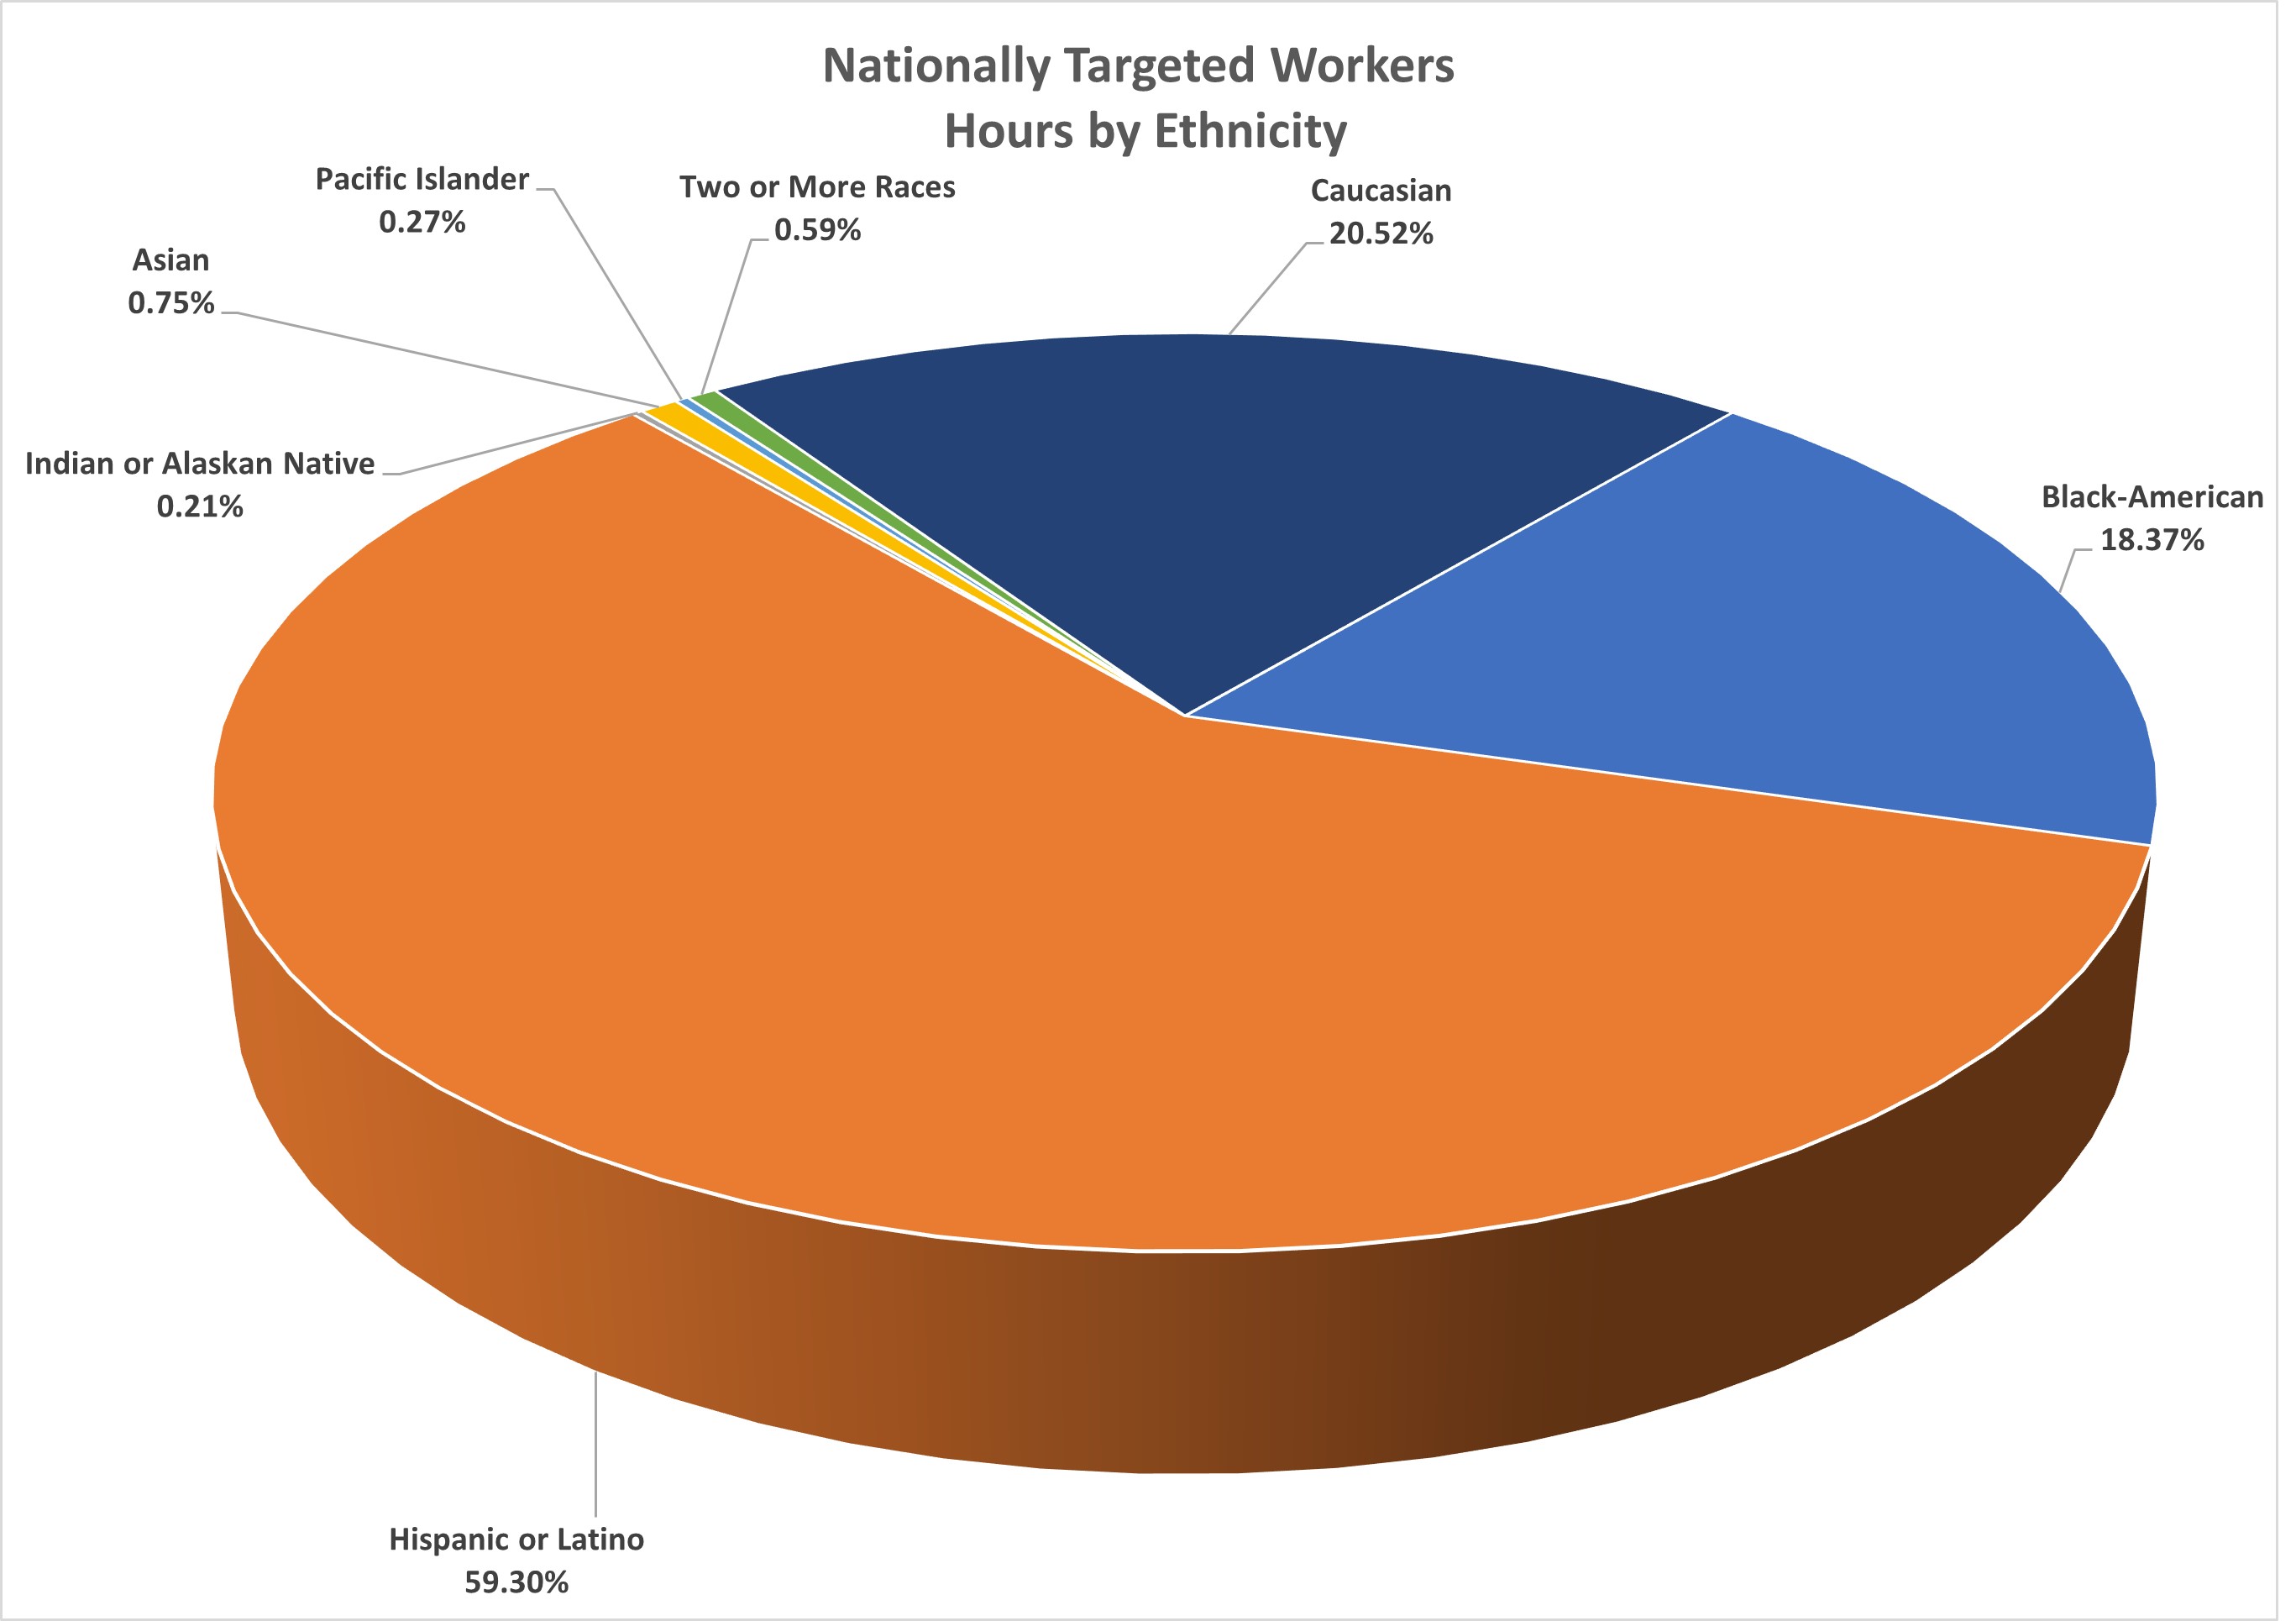 Nationally Targeted Workers Hours by Ethnicity